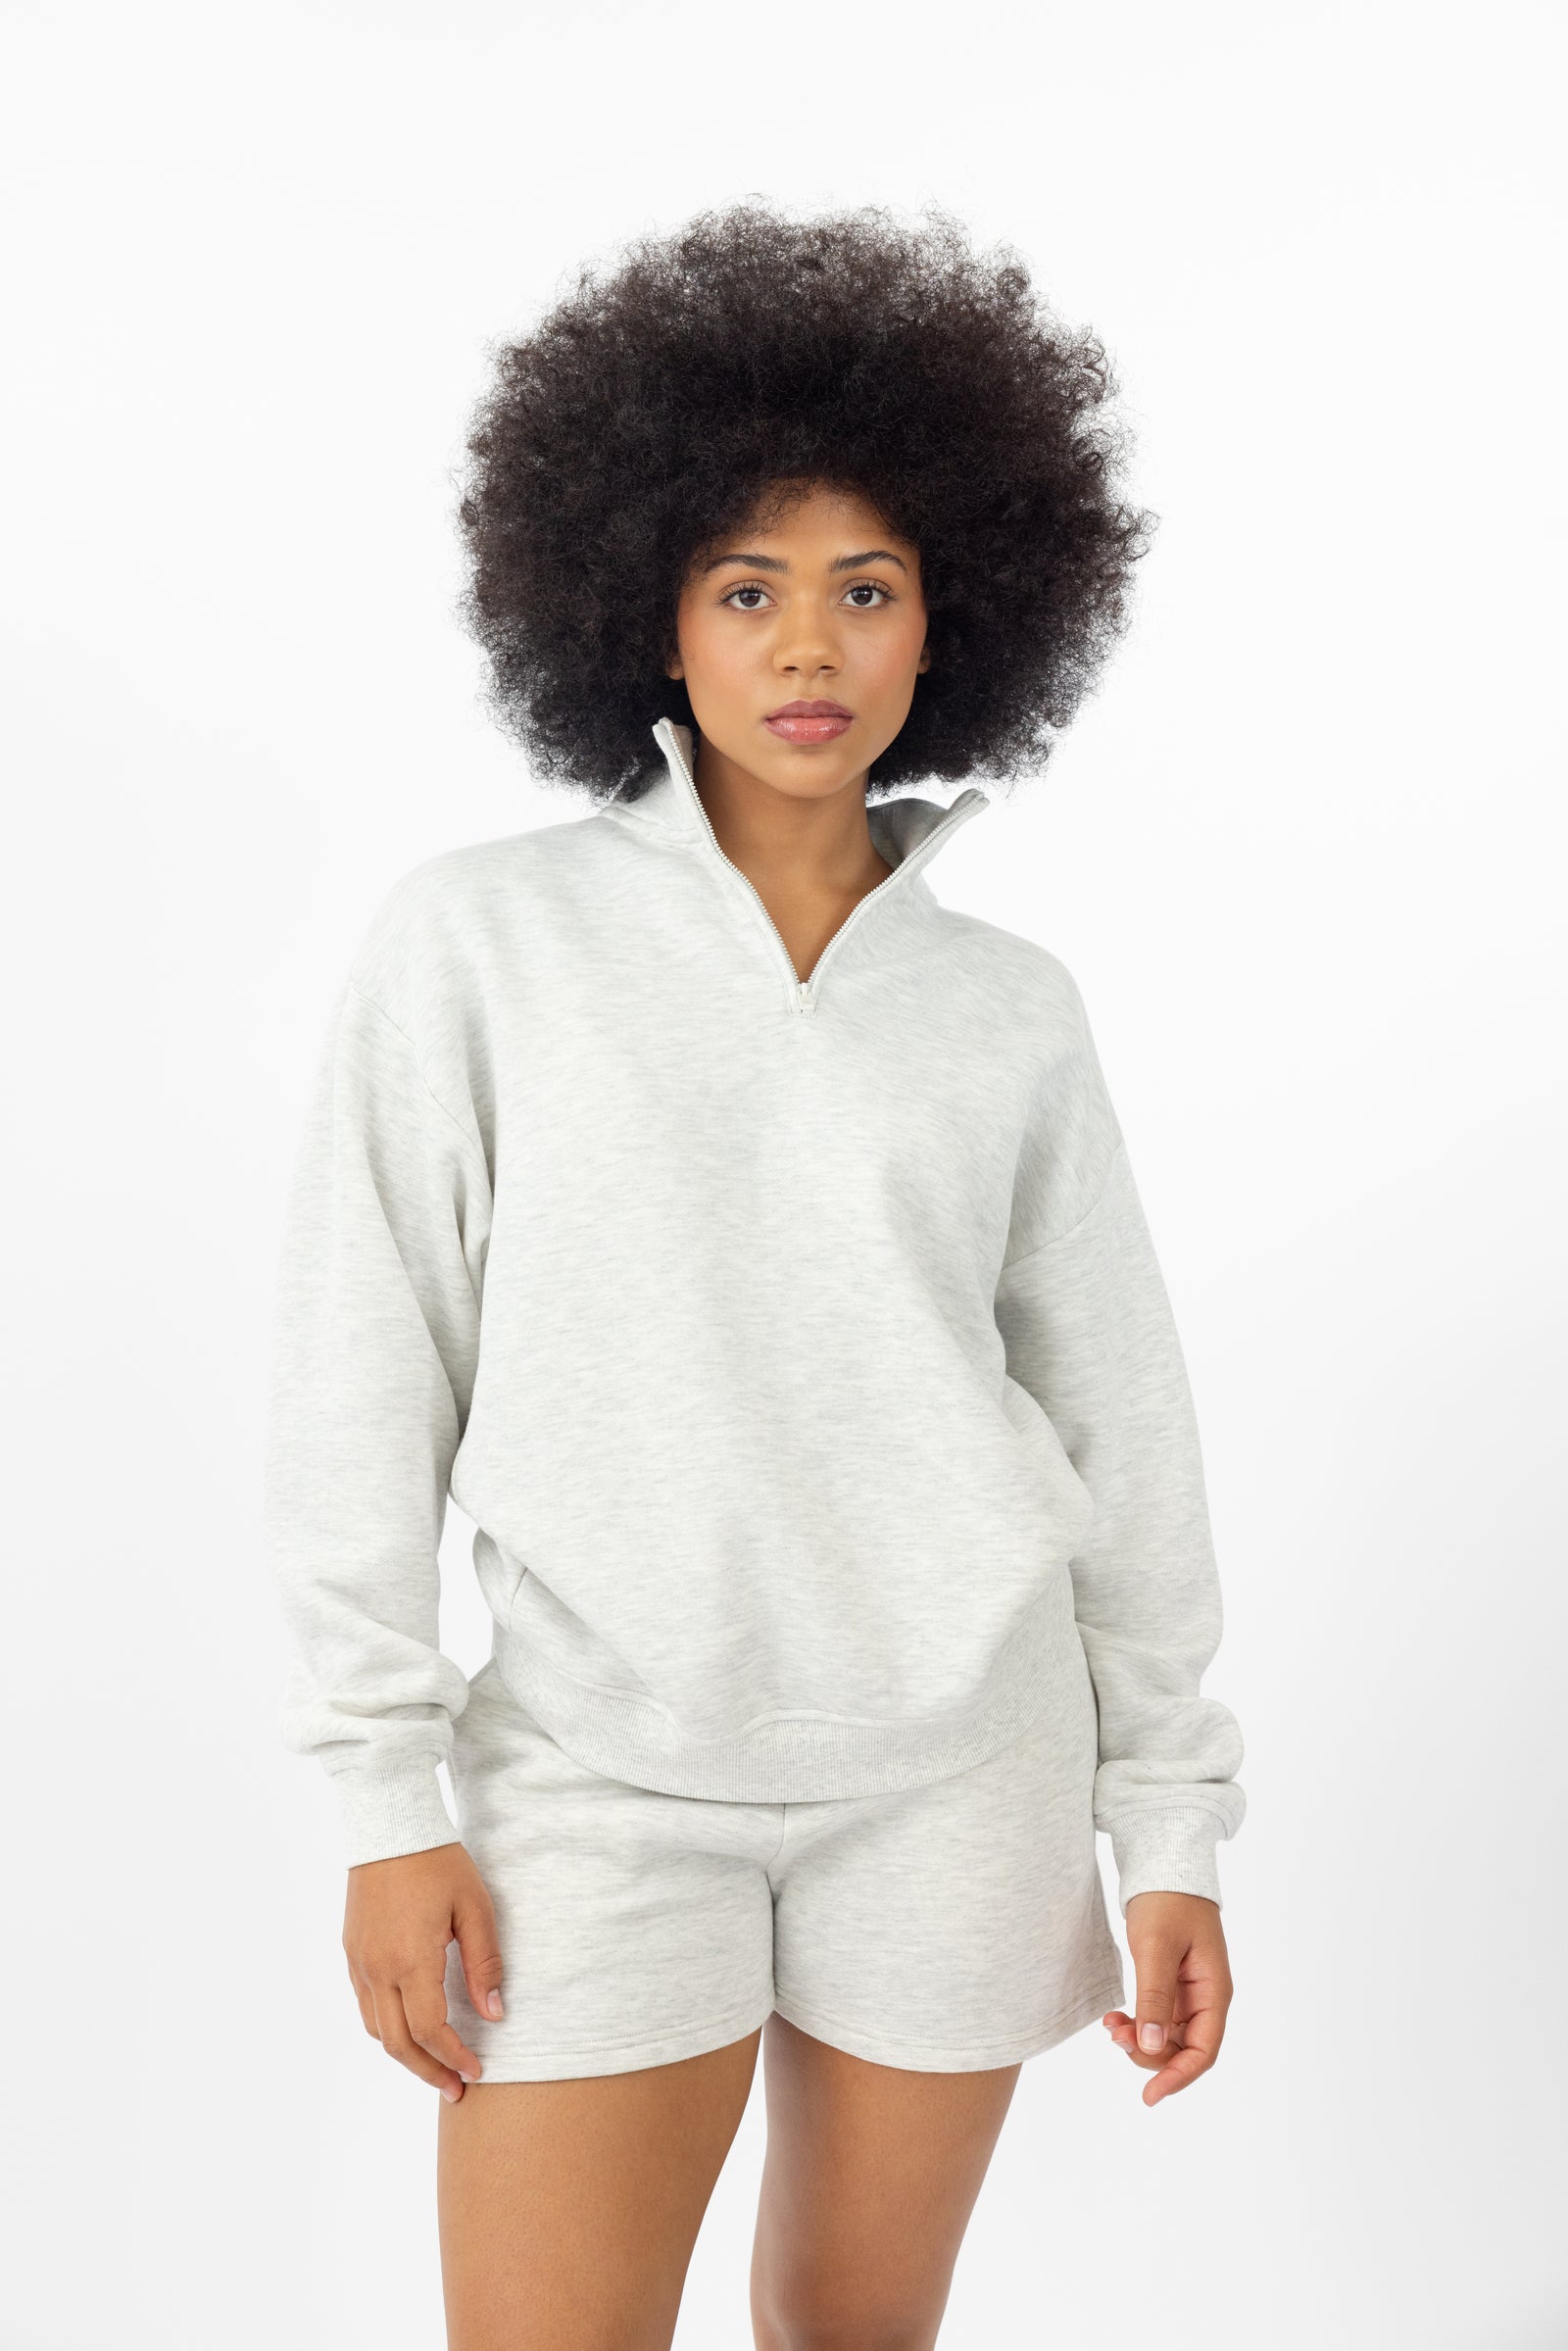 Heather Grey CityScape Quarter Zip. The quarter zip is being worn by a female model. The model is wearing accompanying CityScape clothing to complete the look of the quarter zip. The photo was taken with a white background. 